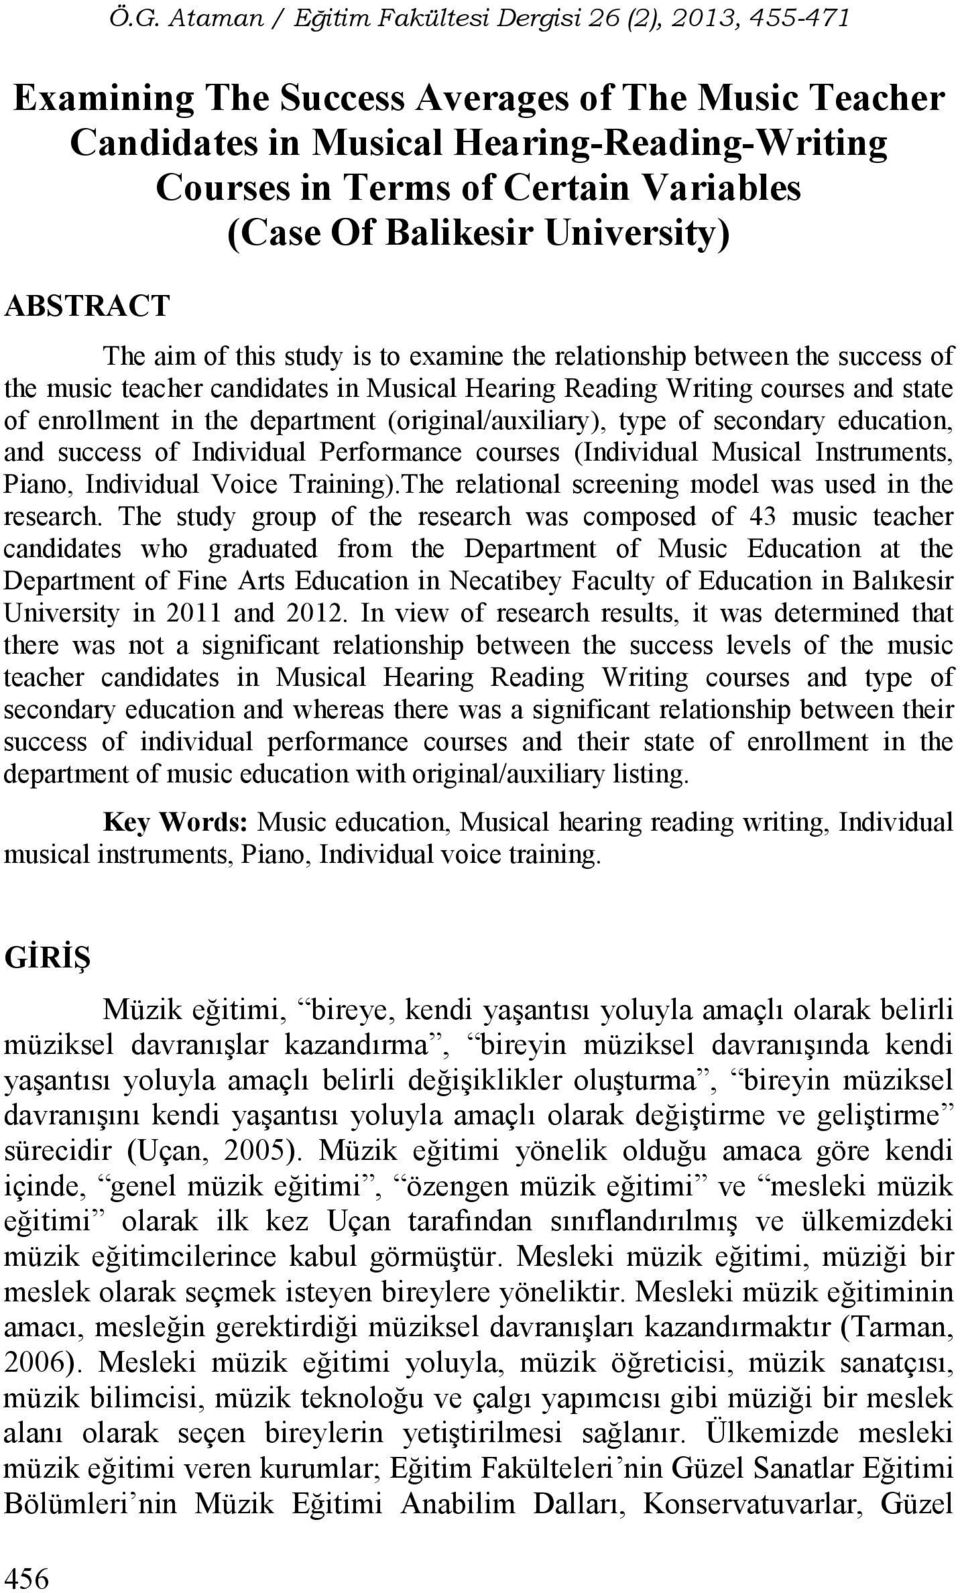 secondary education, and success of Individual Performance courses (Individual Musical Instruments, Piano, Individual Voice Training).The relational screening model was used in the research.